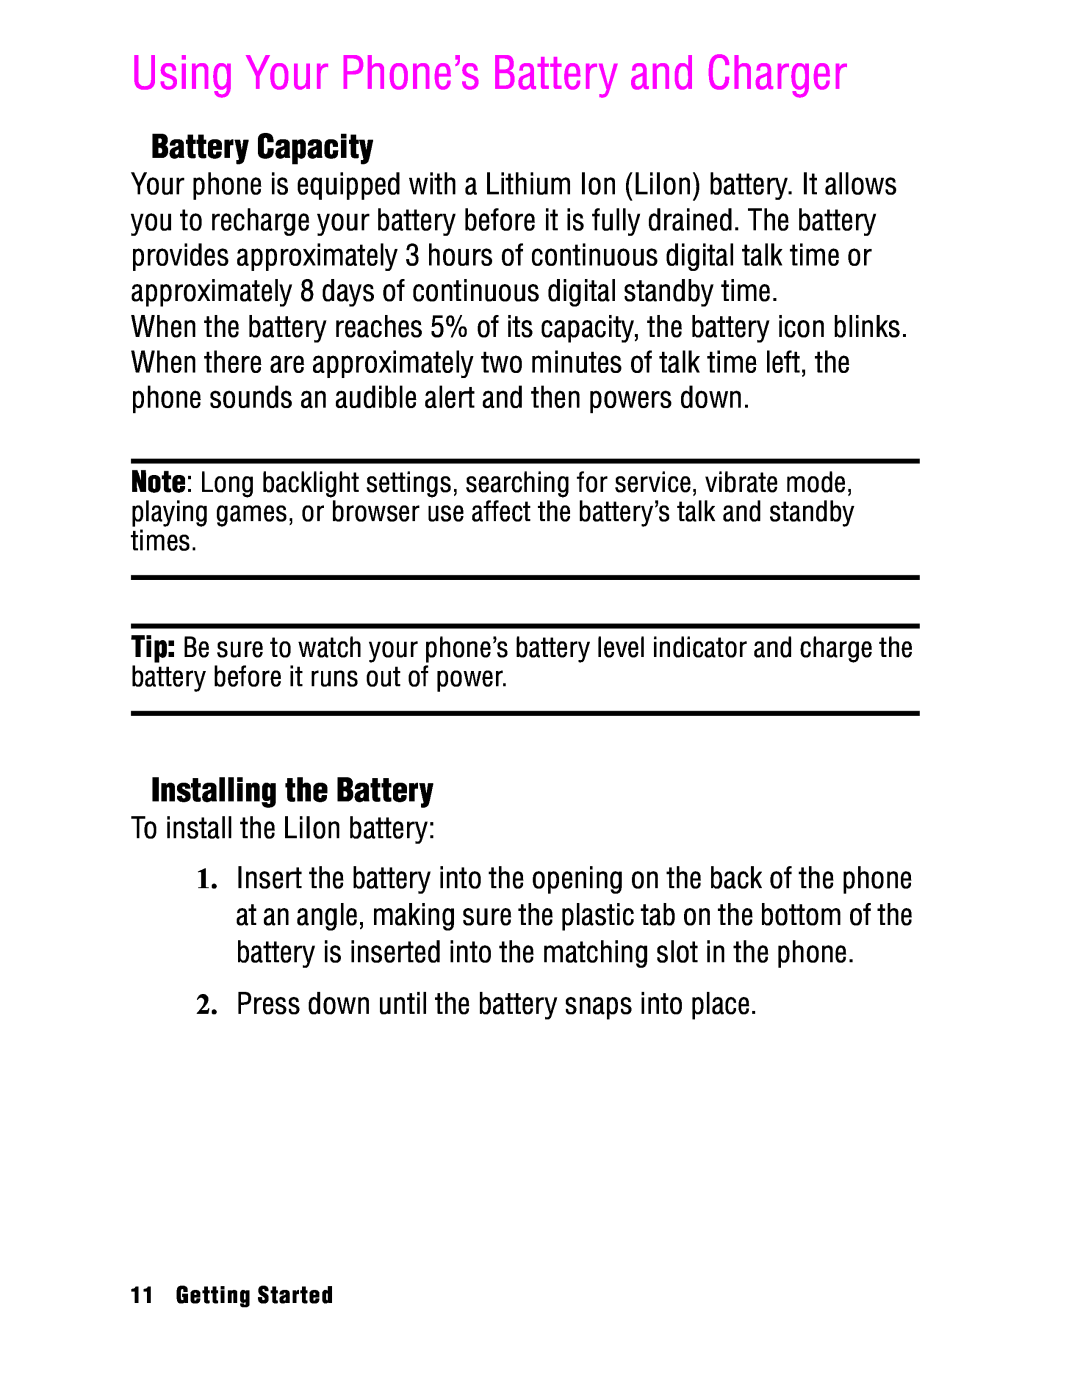 Samsung SPH-a740 manual Using Your Phone’s Battery and Charger, Battery Capacity, Installing the Battery 